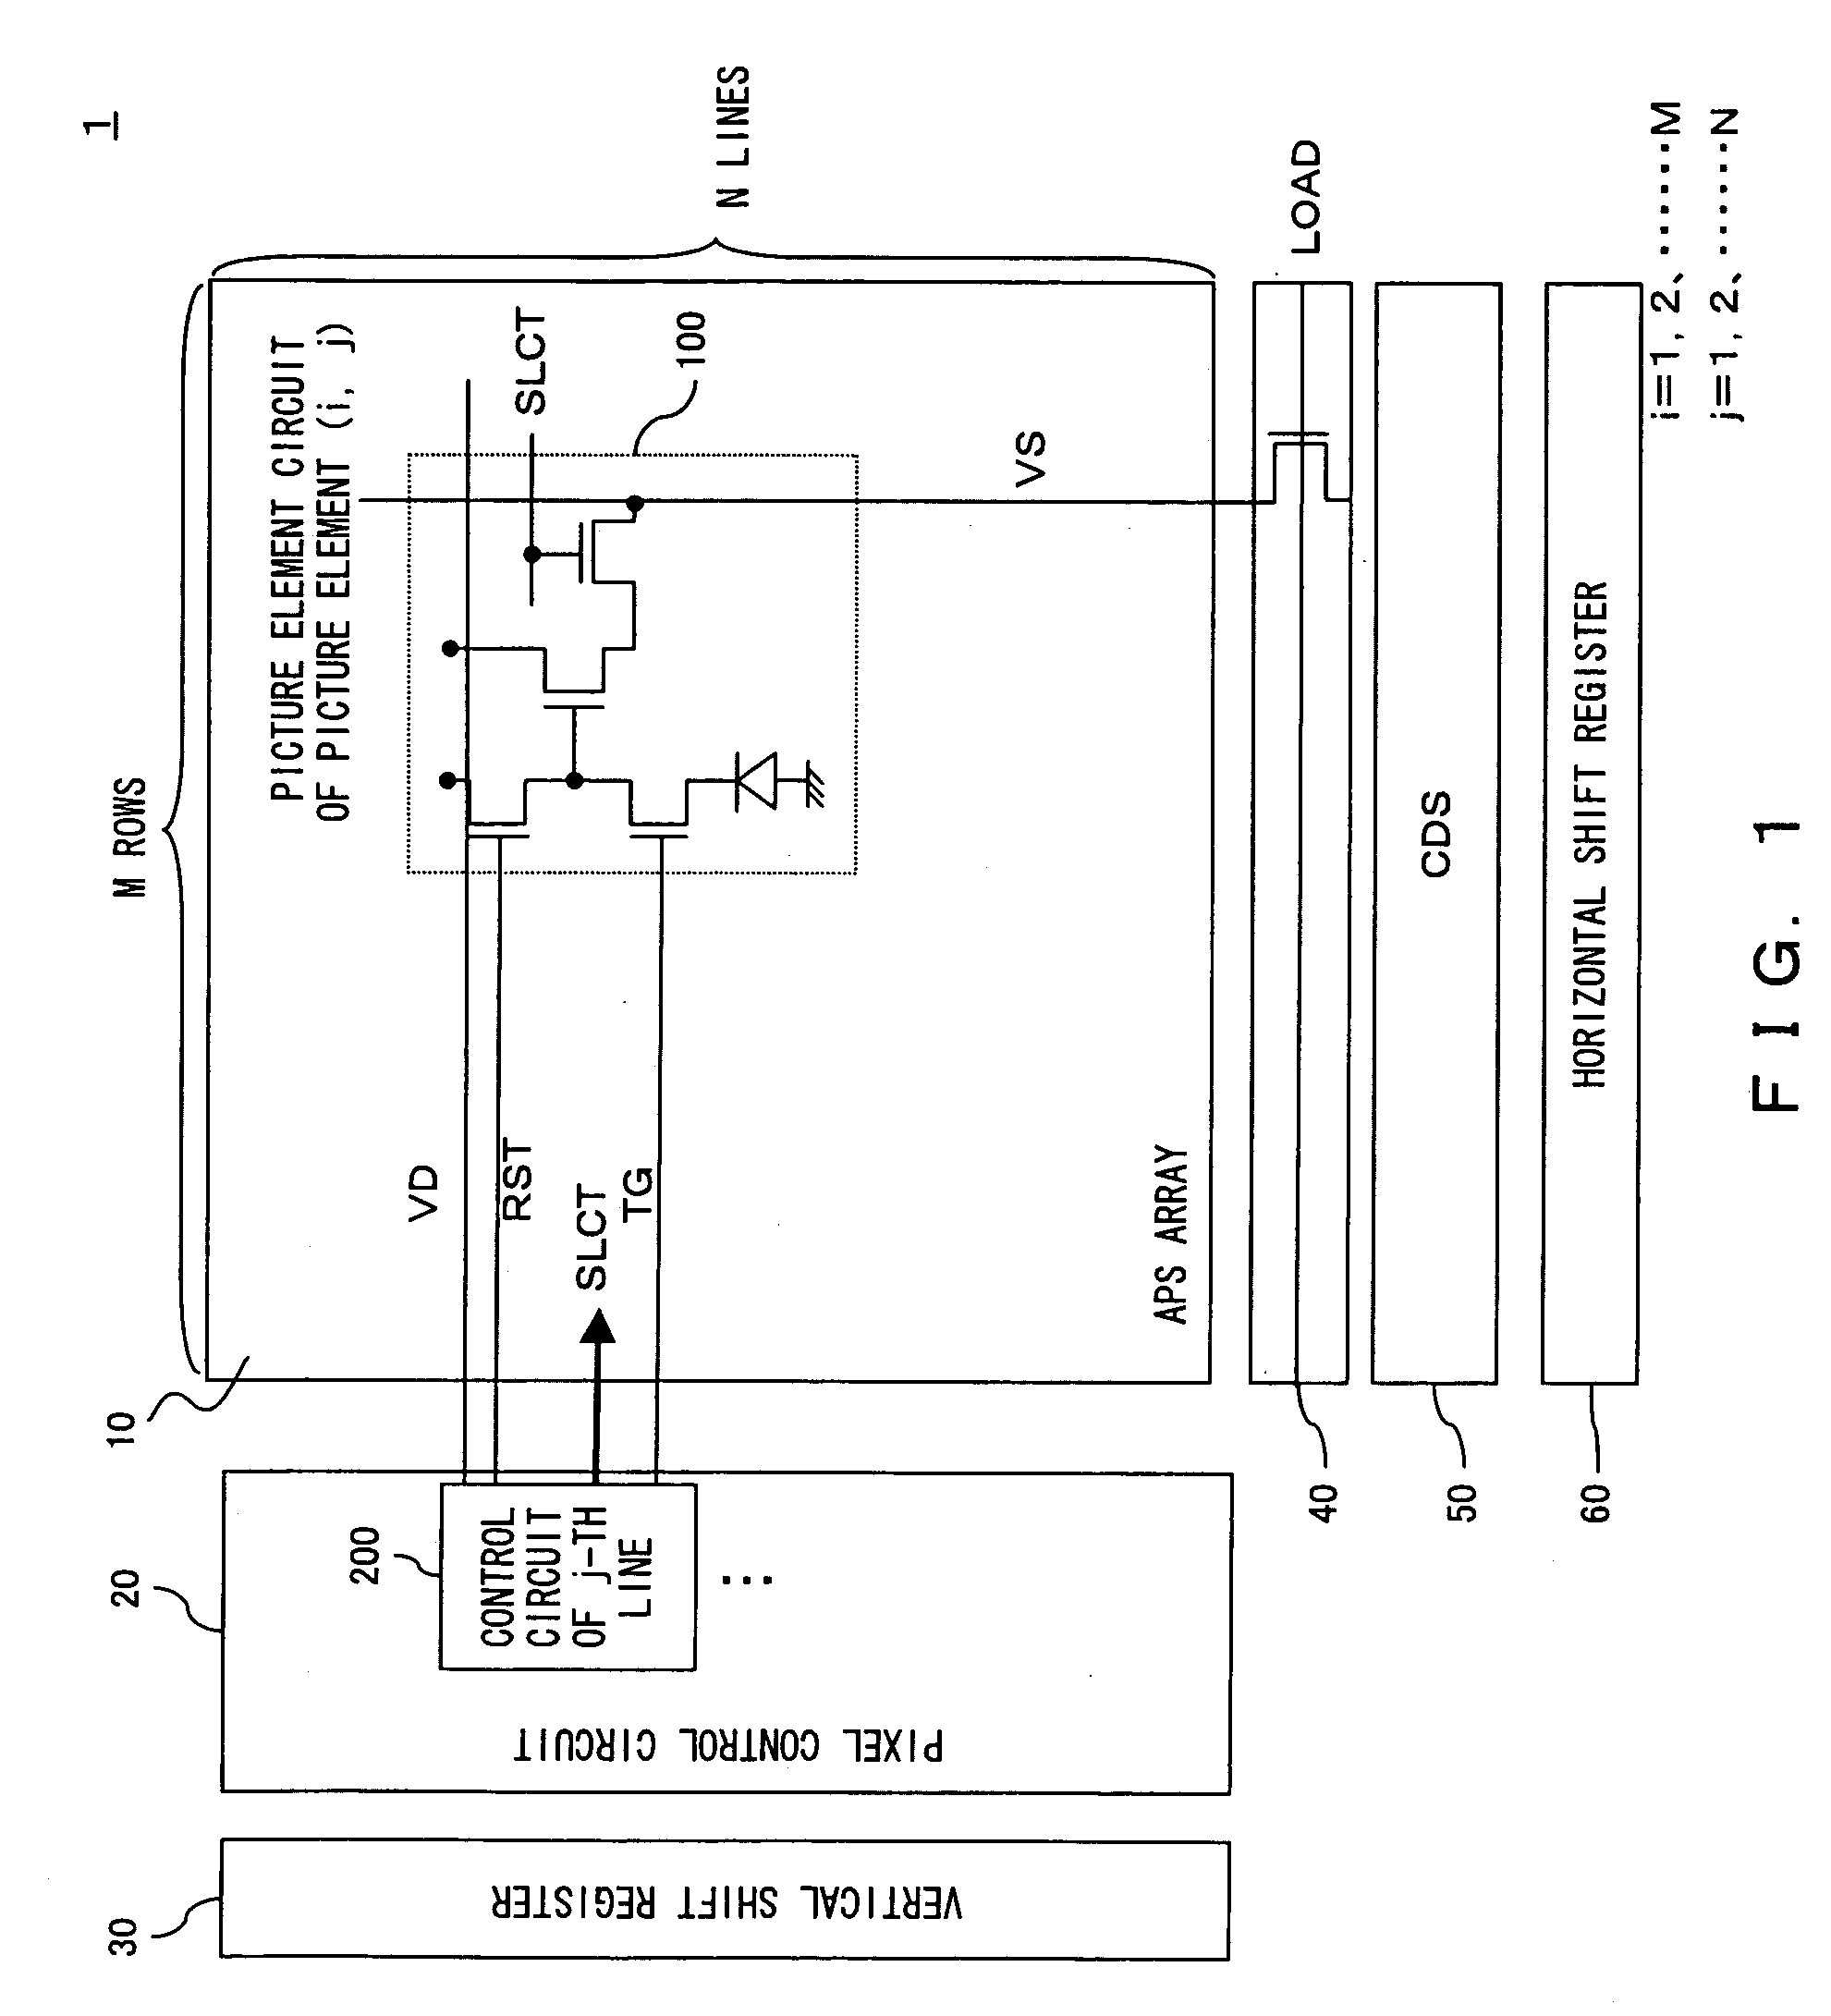 CMOS image sensor which reduced noise caused by charge pump operation